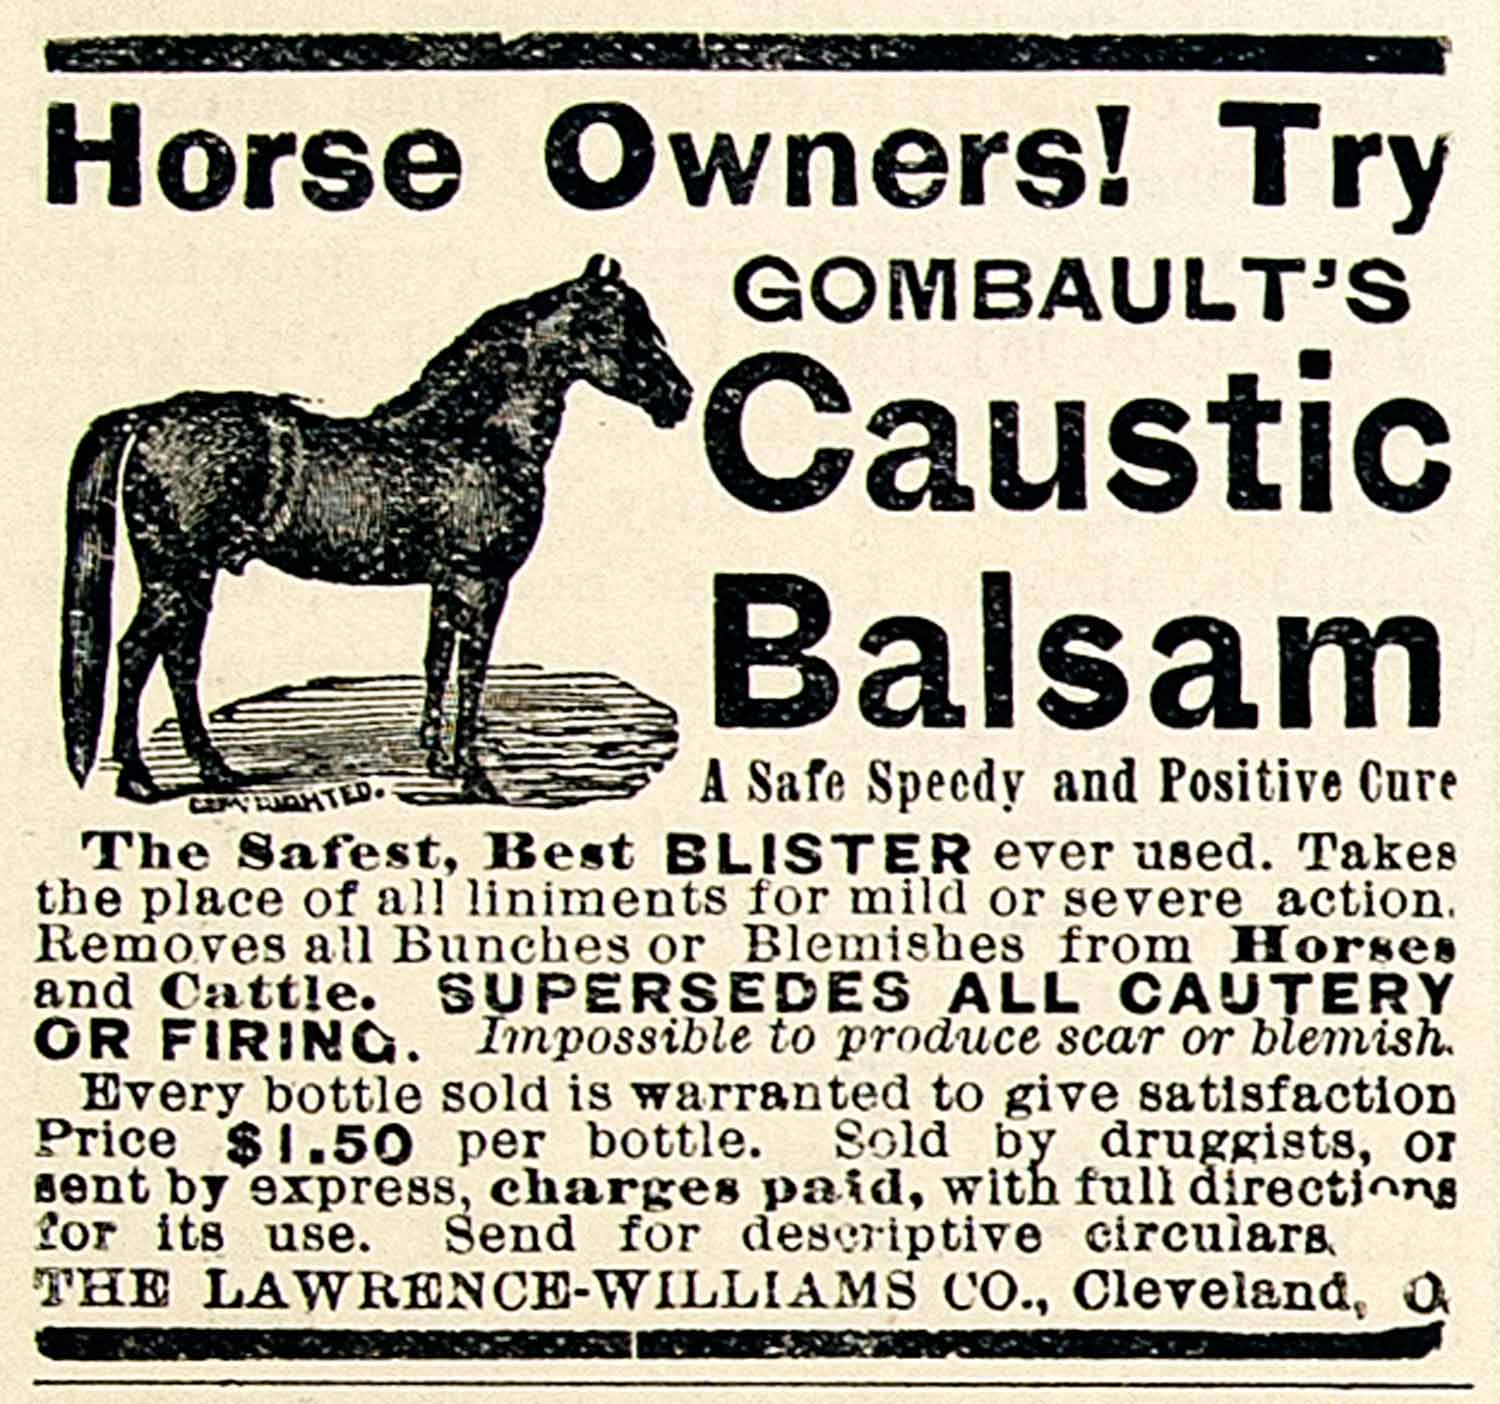 1893 Ad Lawrence-Williams Gombaults Caustic Balsam Horse Ointment Cure CCG1